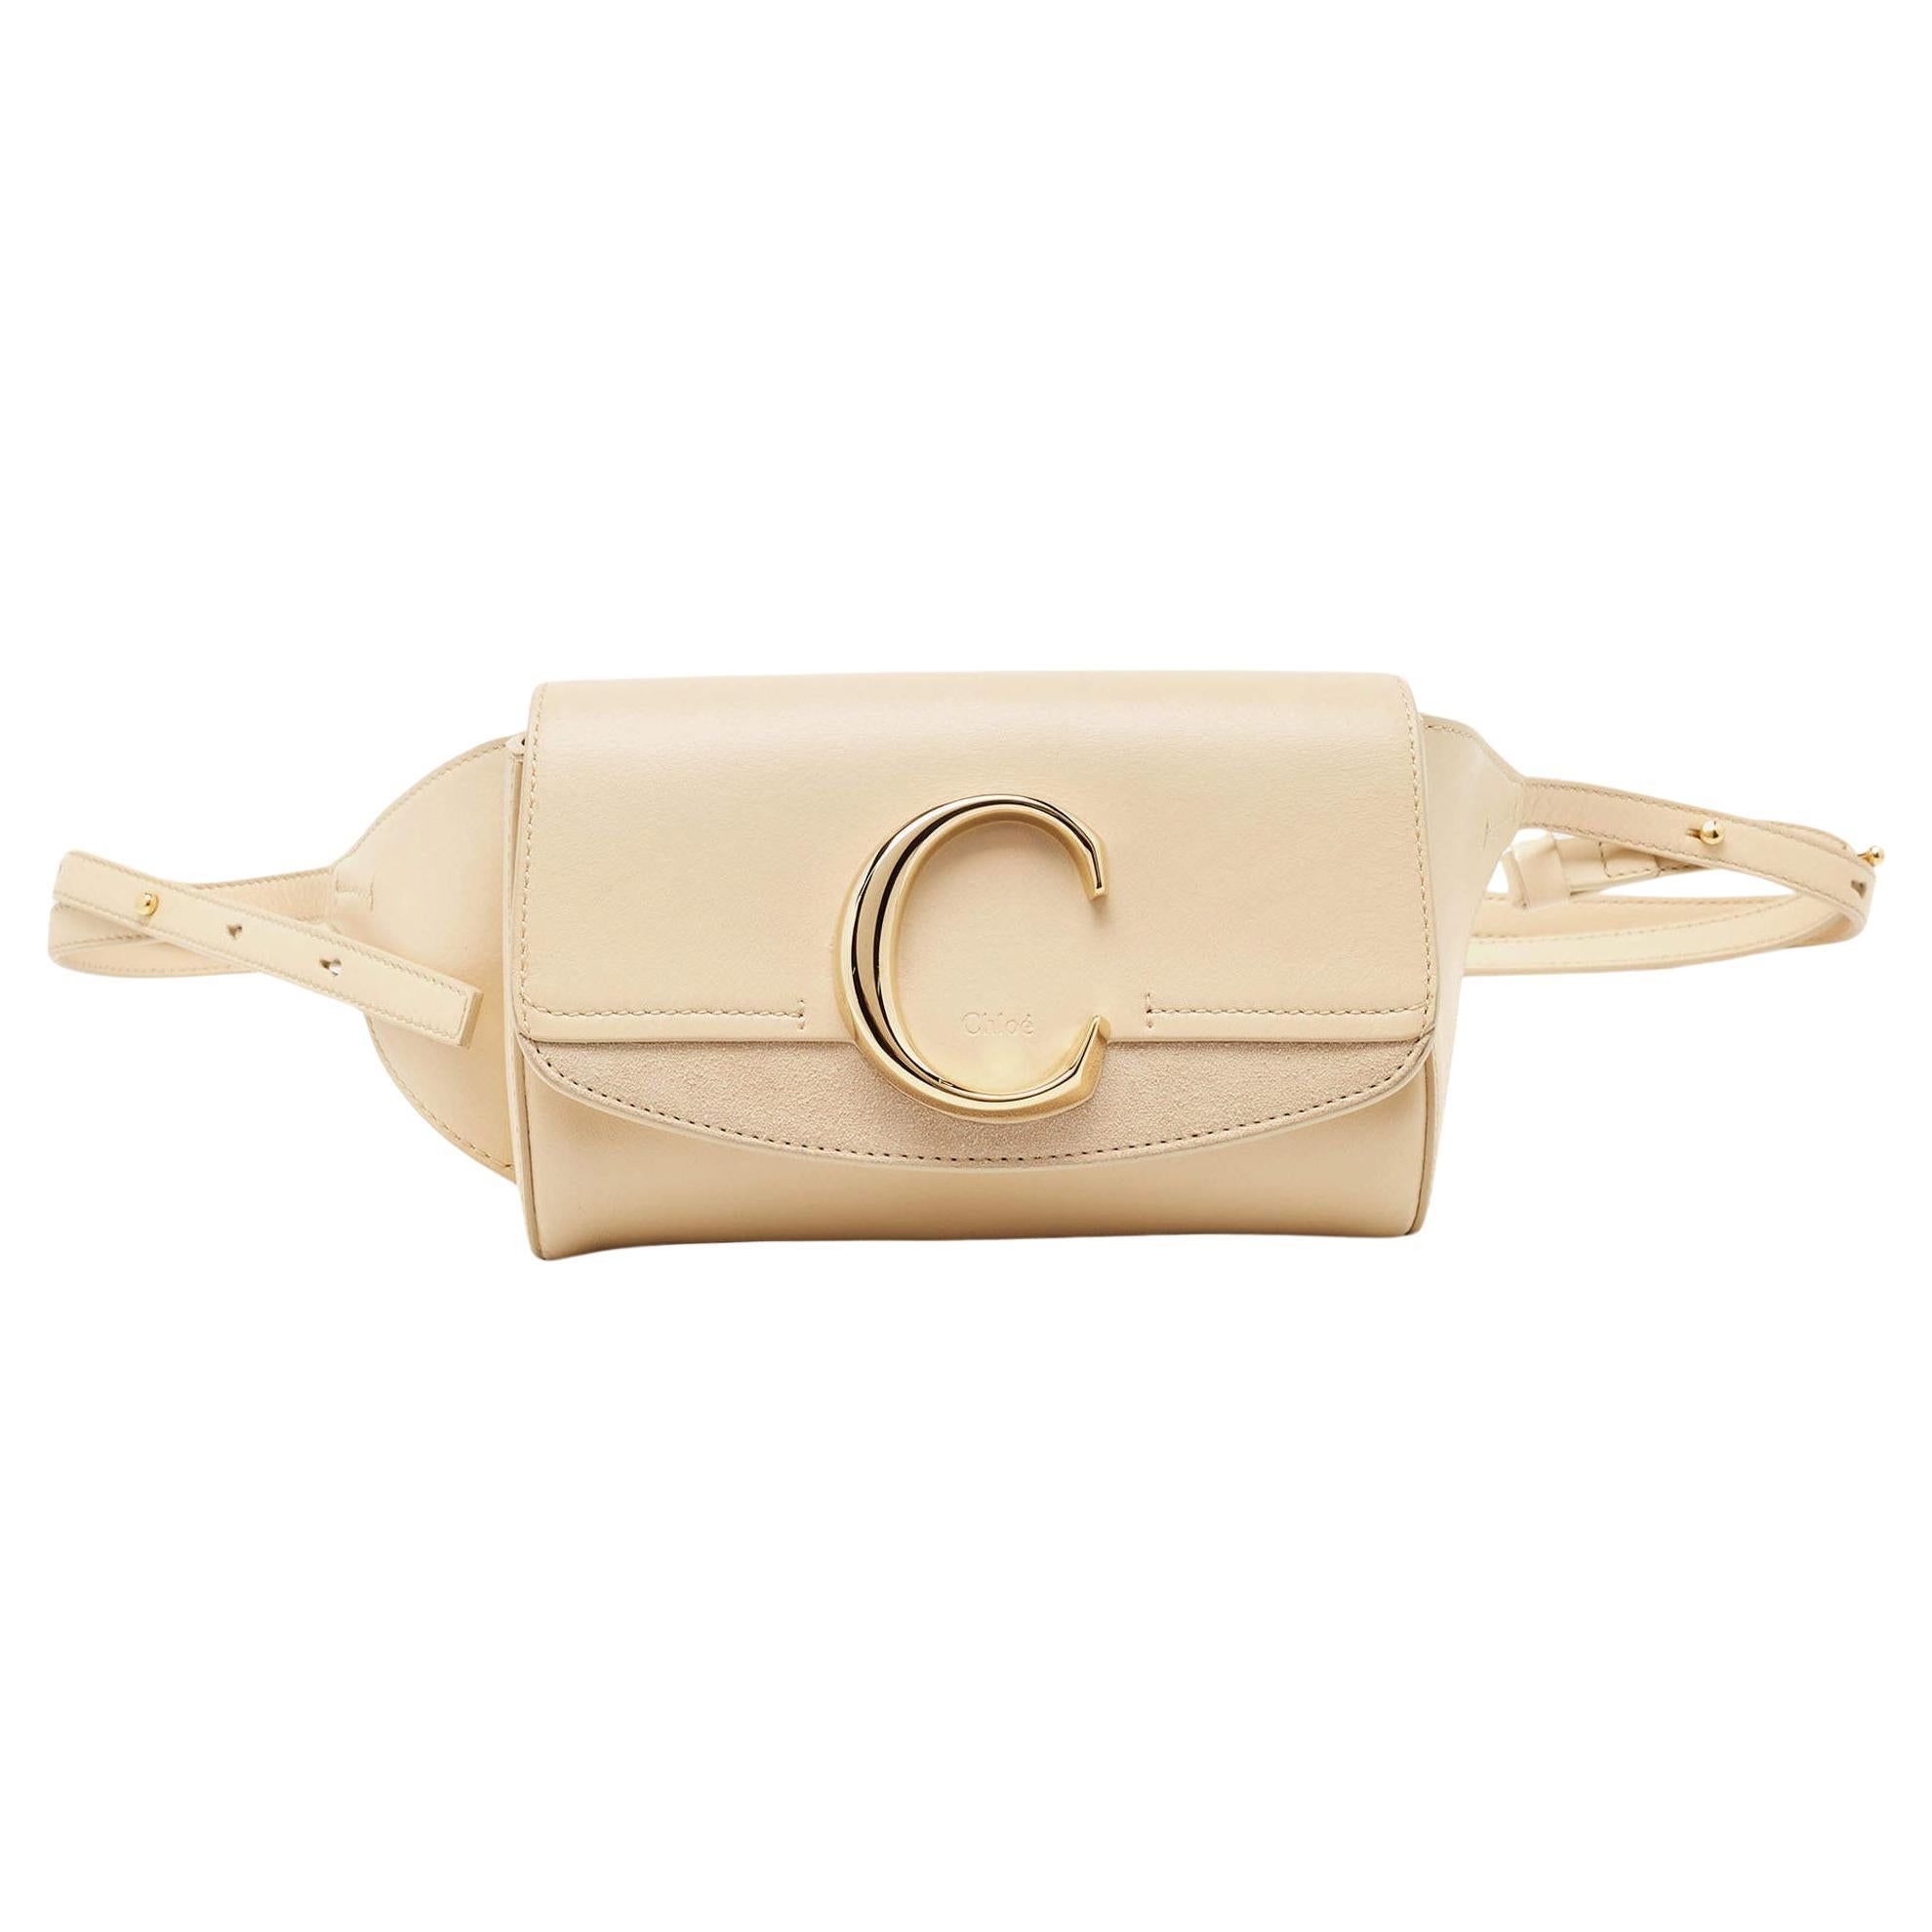 Chloe Cream Leather and Suede Chloe C Belt Bag For Sale